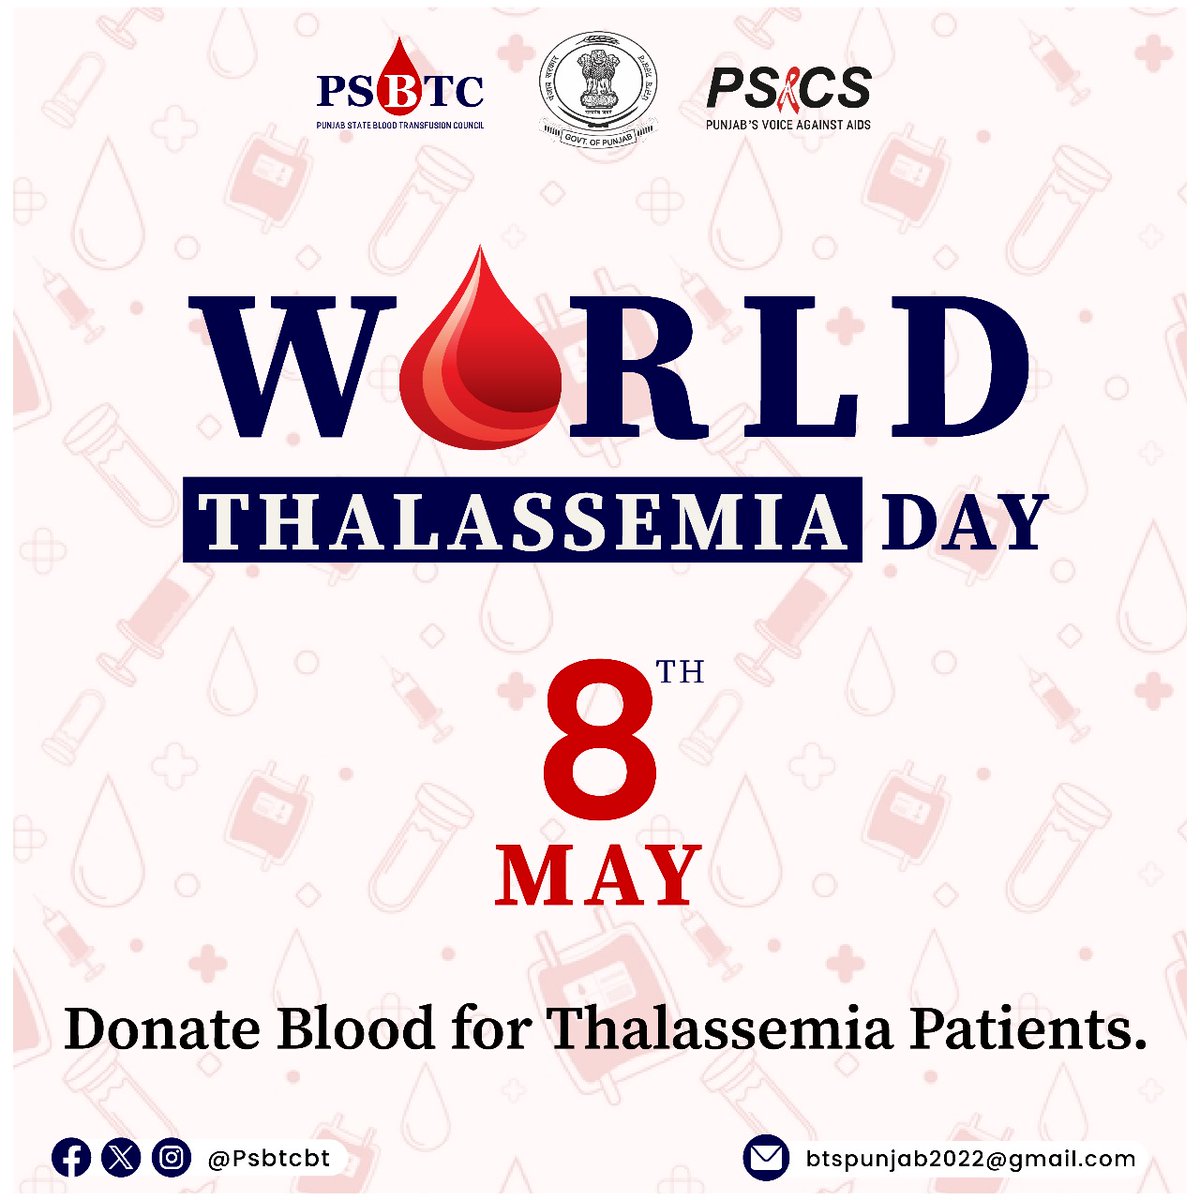 On #ThalassemiaDay, PSBTC is committed to raising awareness about this genetic blood disorder, emphasizing the importance of blood donation. Let's stand together to support those affected and spread hope for a brighter future.

#ThalassemiaFreeIndia #blooddonation  #blooddonors